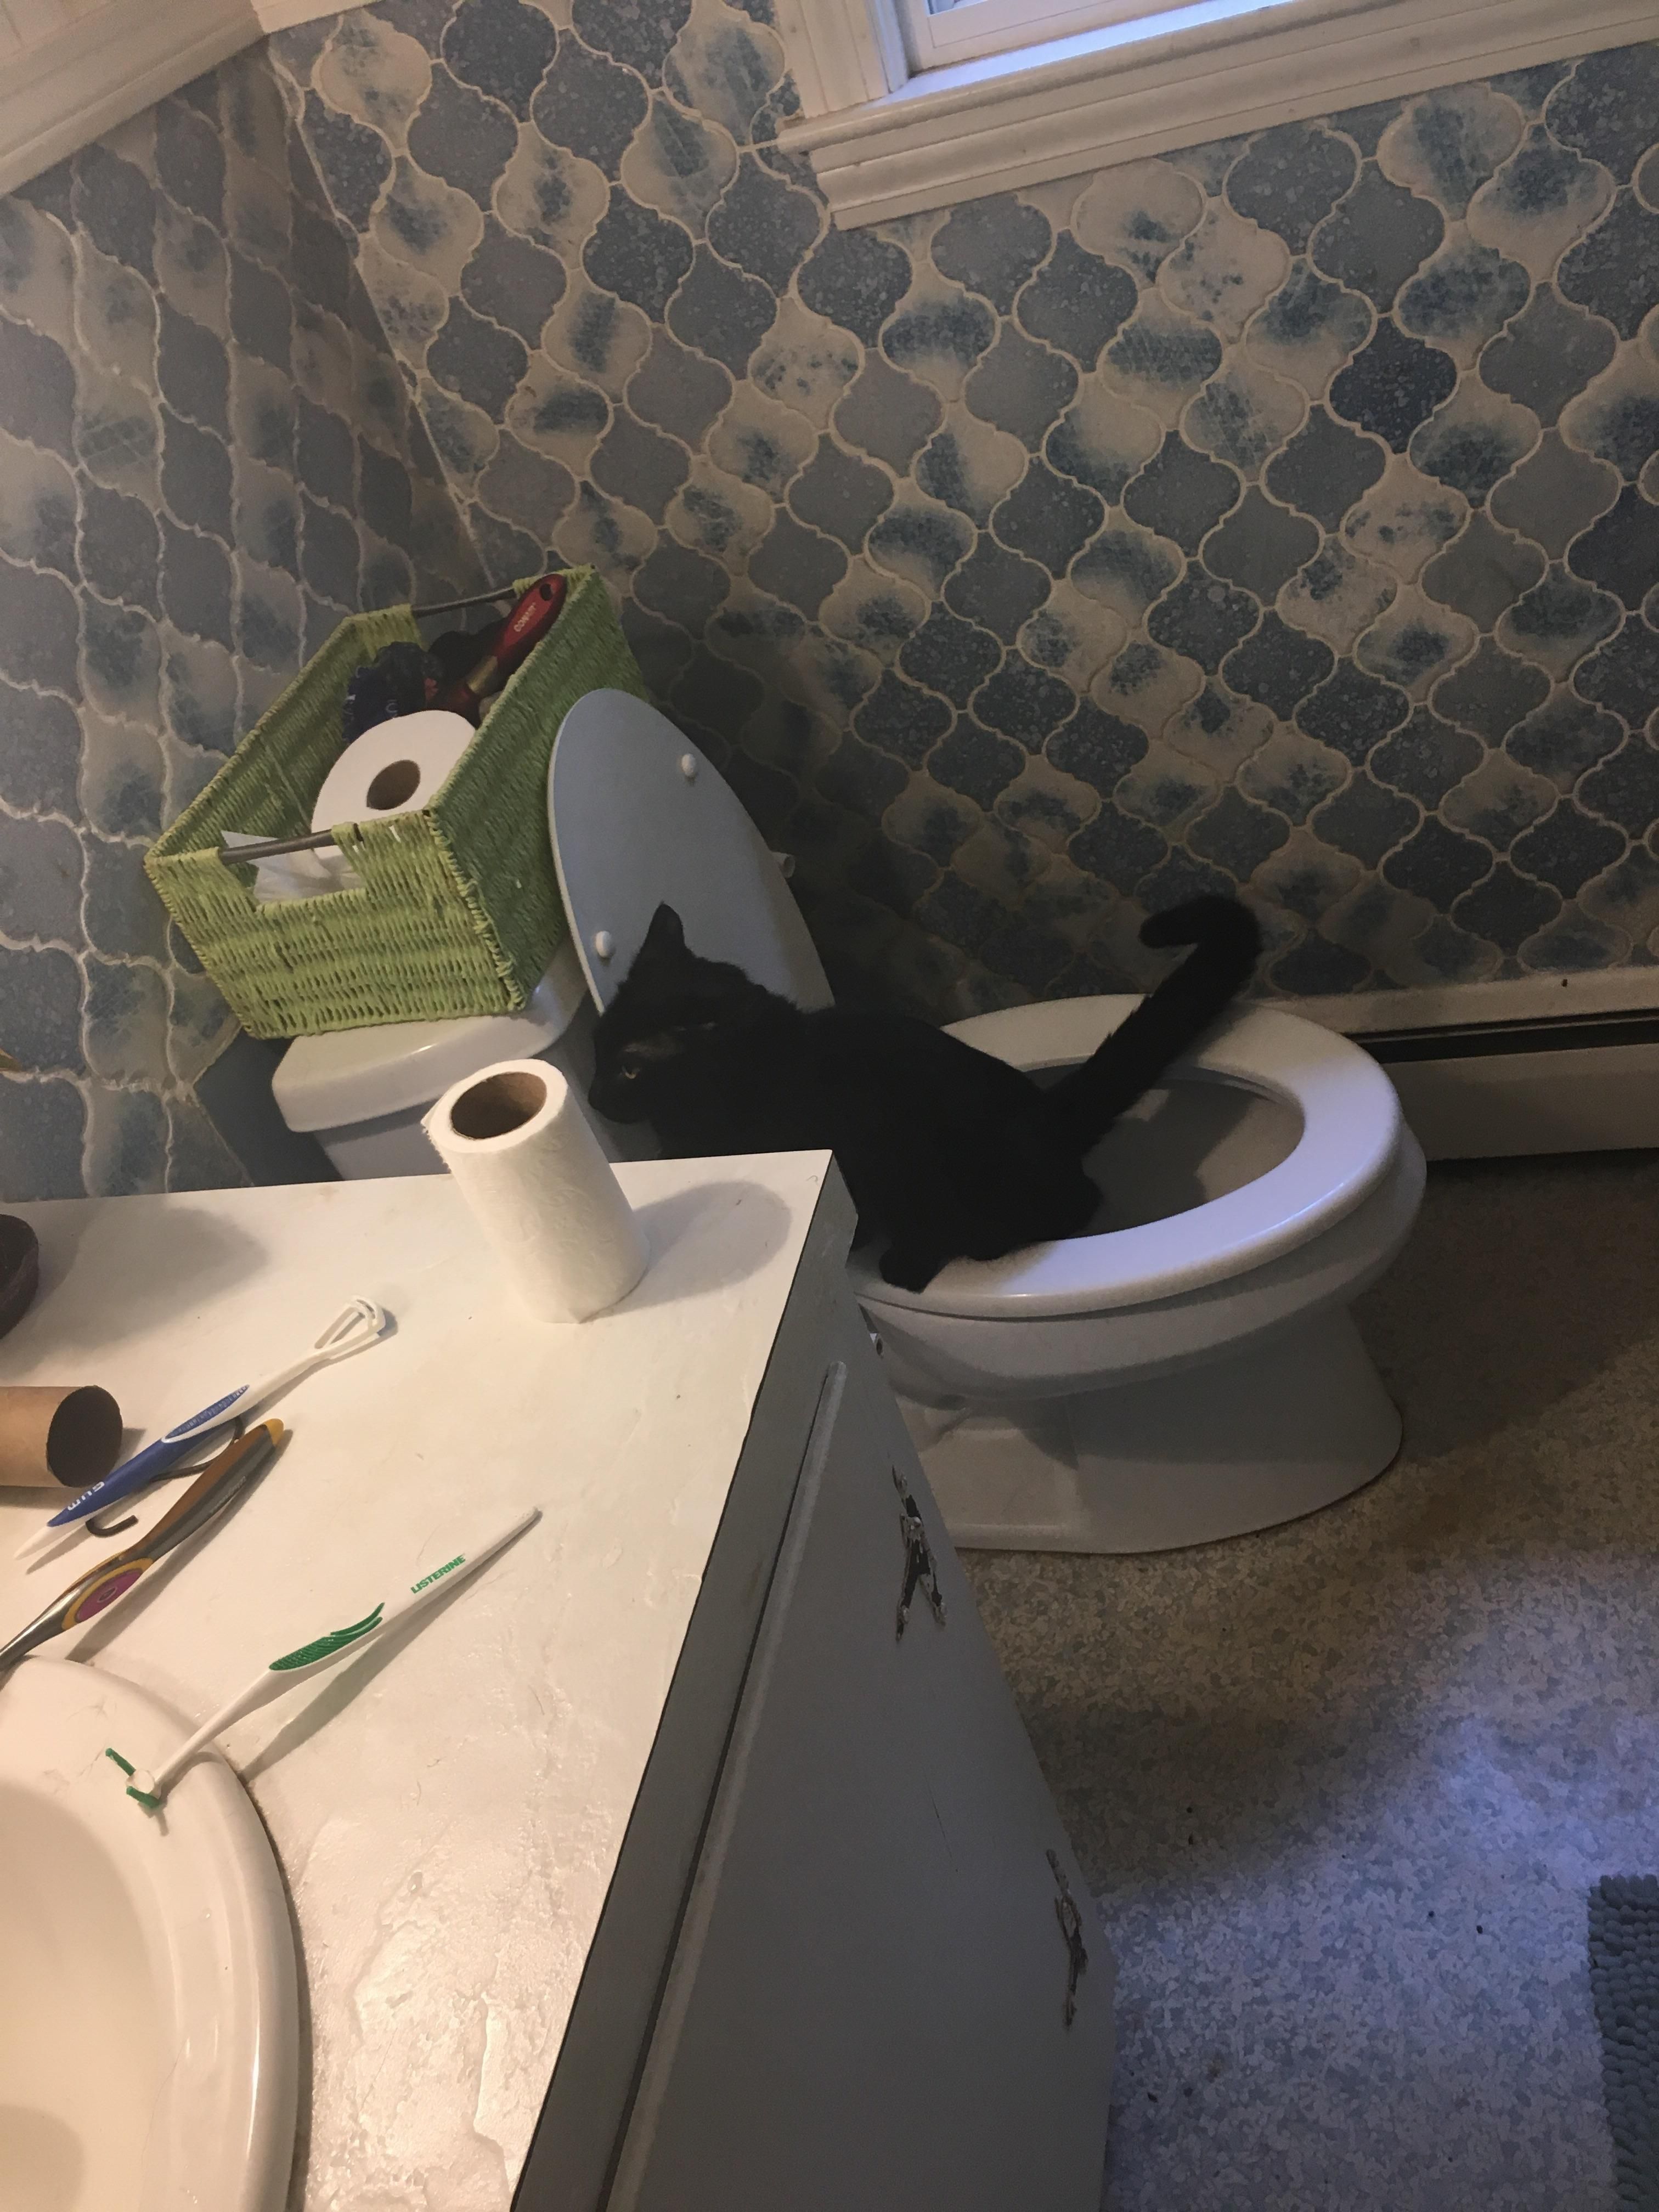 My friend came home from a mini-vacation and forgot to change the kitty litter. This morning she's brushing her teeth and hears a little tinkle...